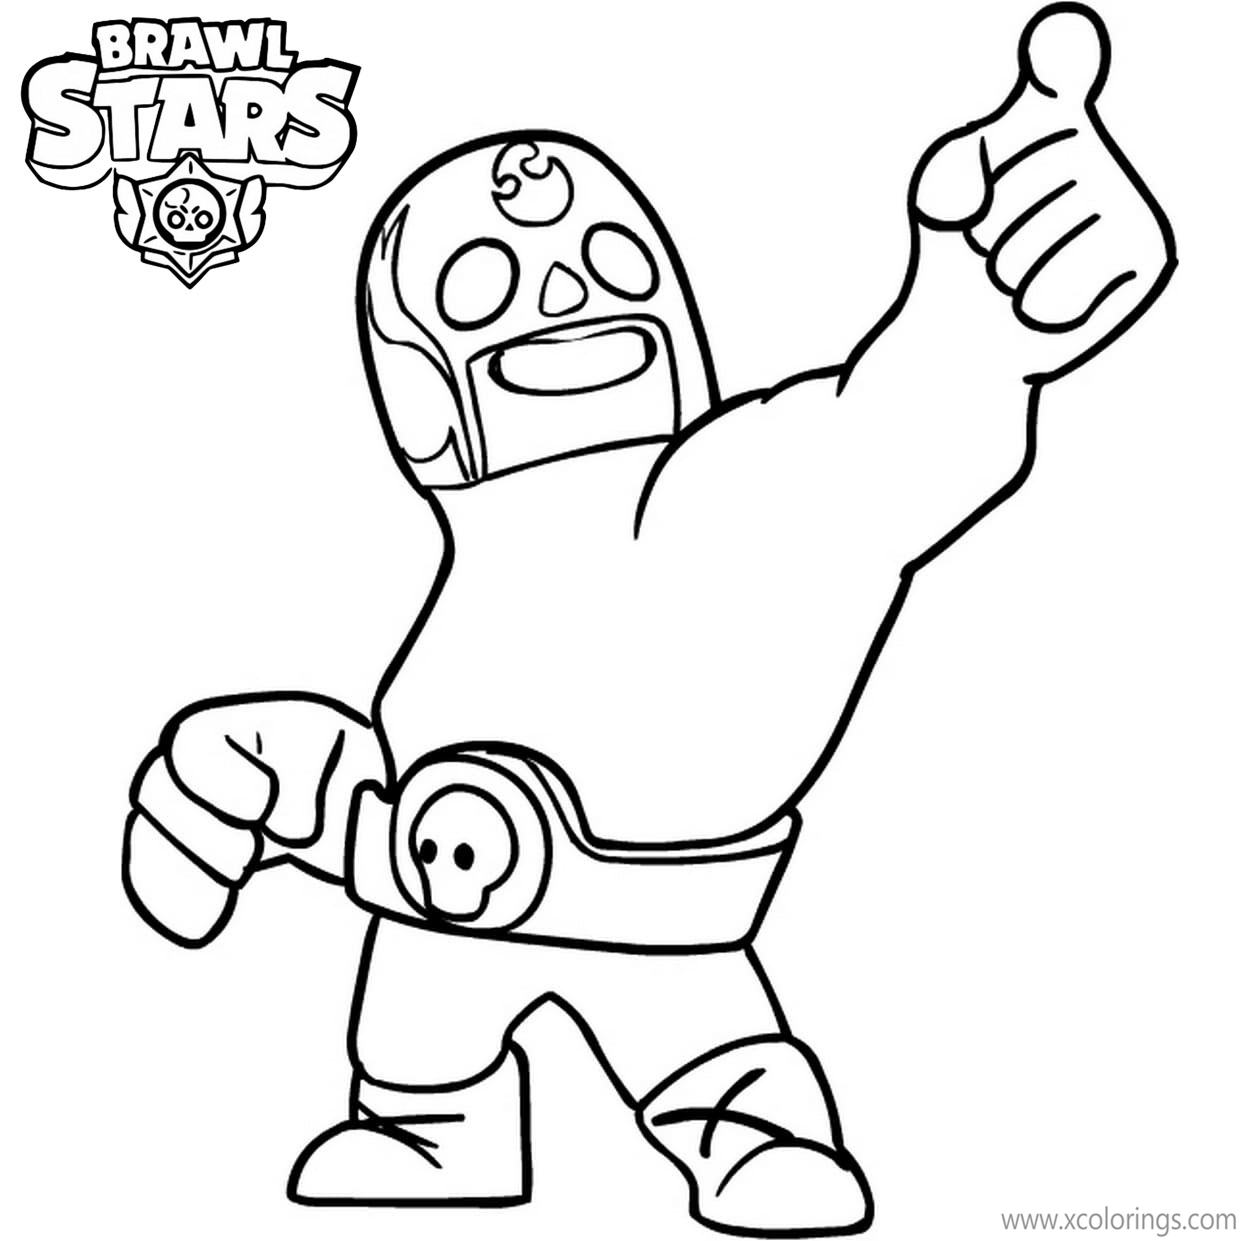 Free El Primo Brawl Stars Coloring Pages Black and White printable